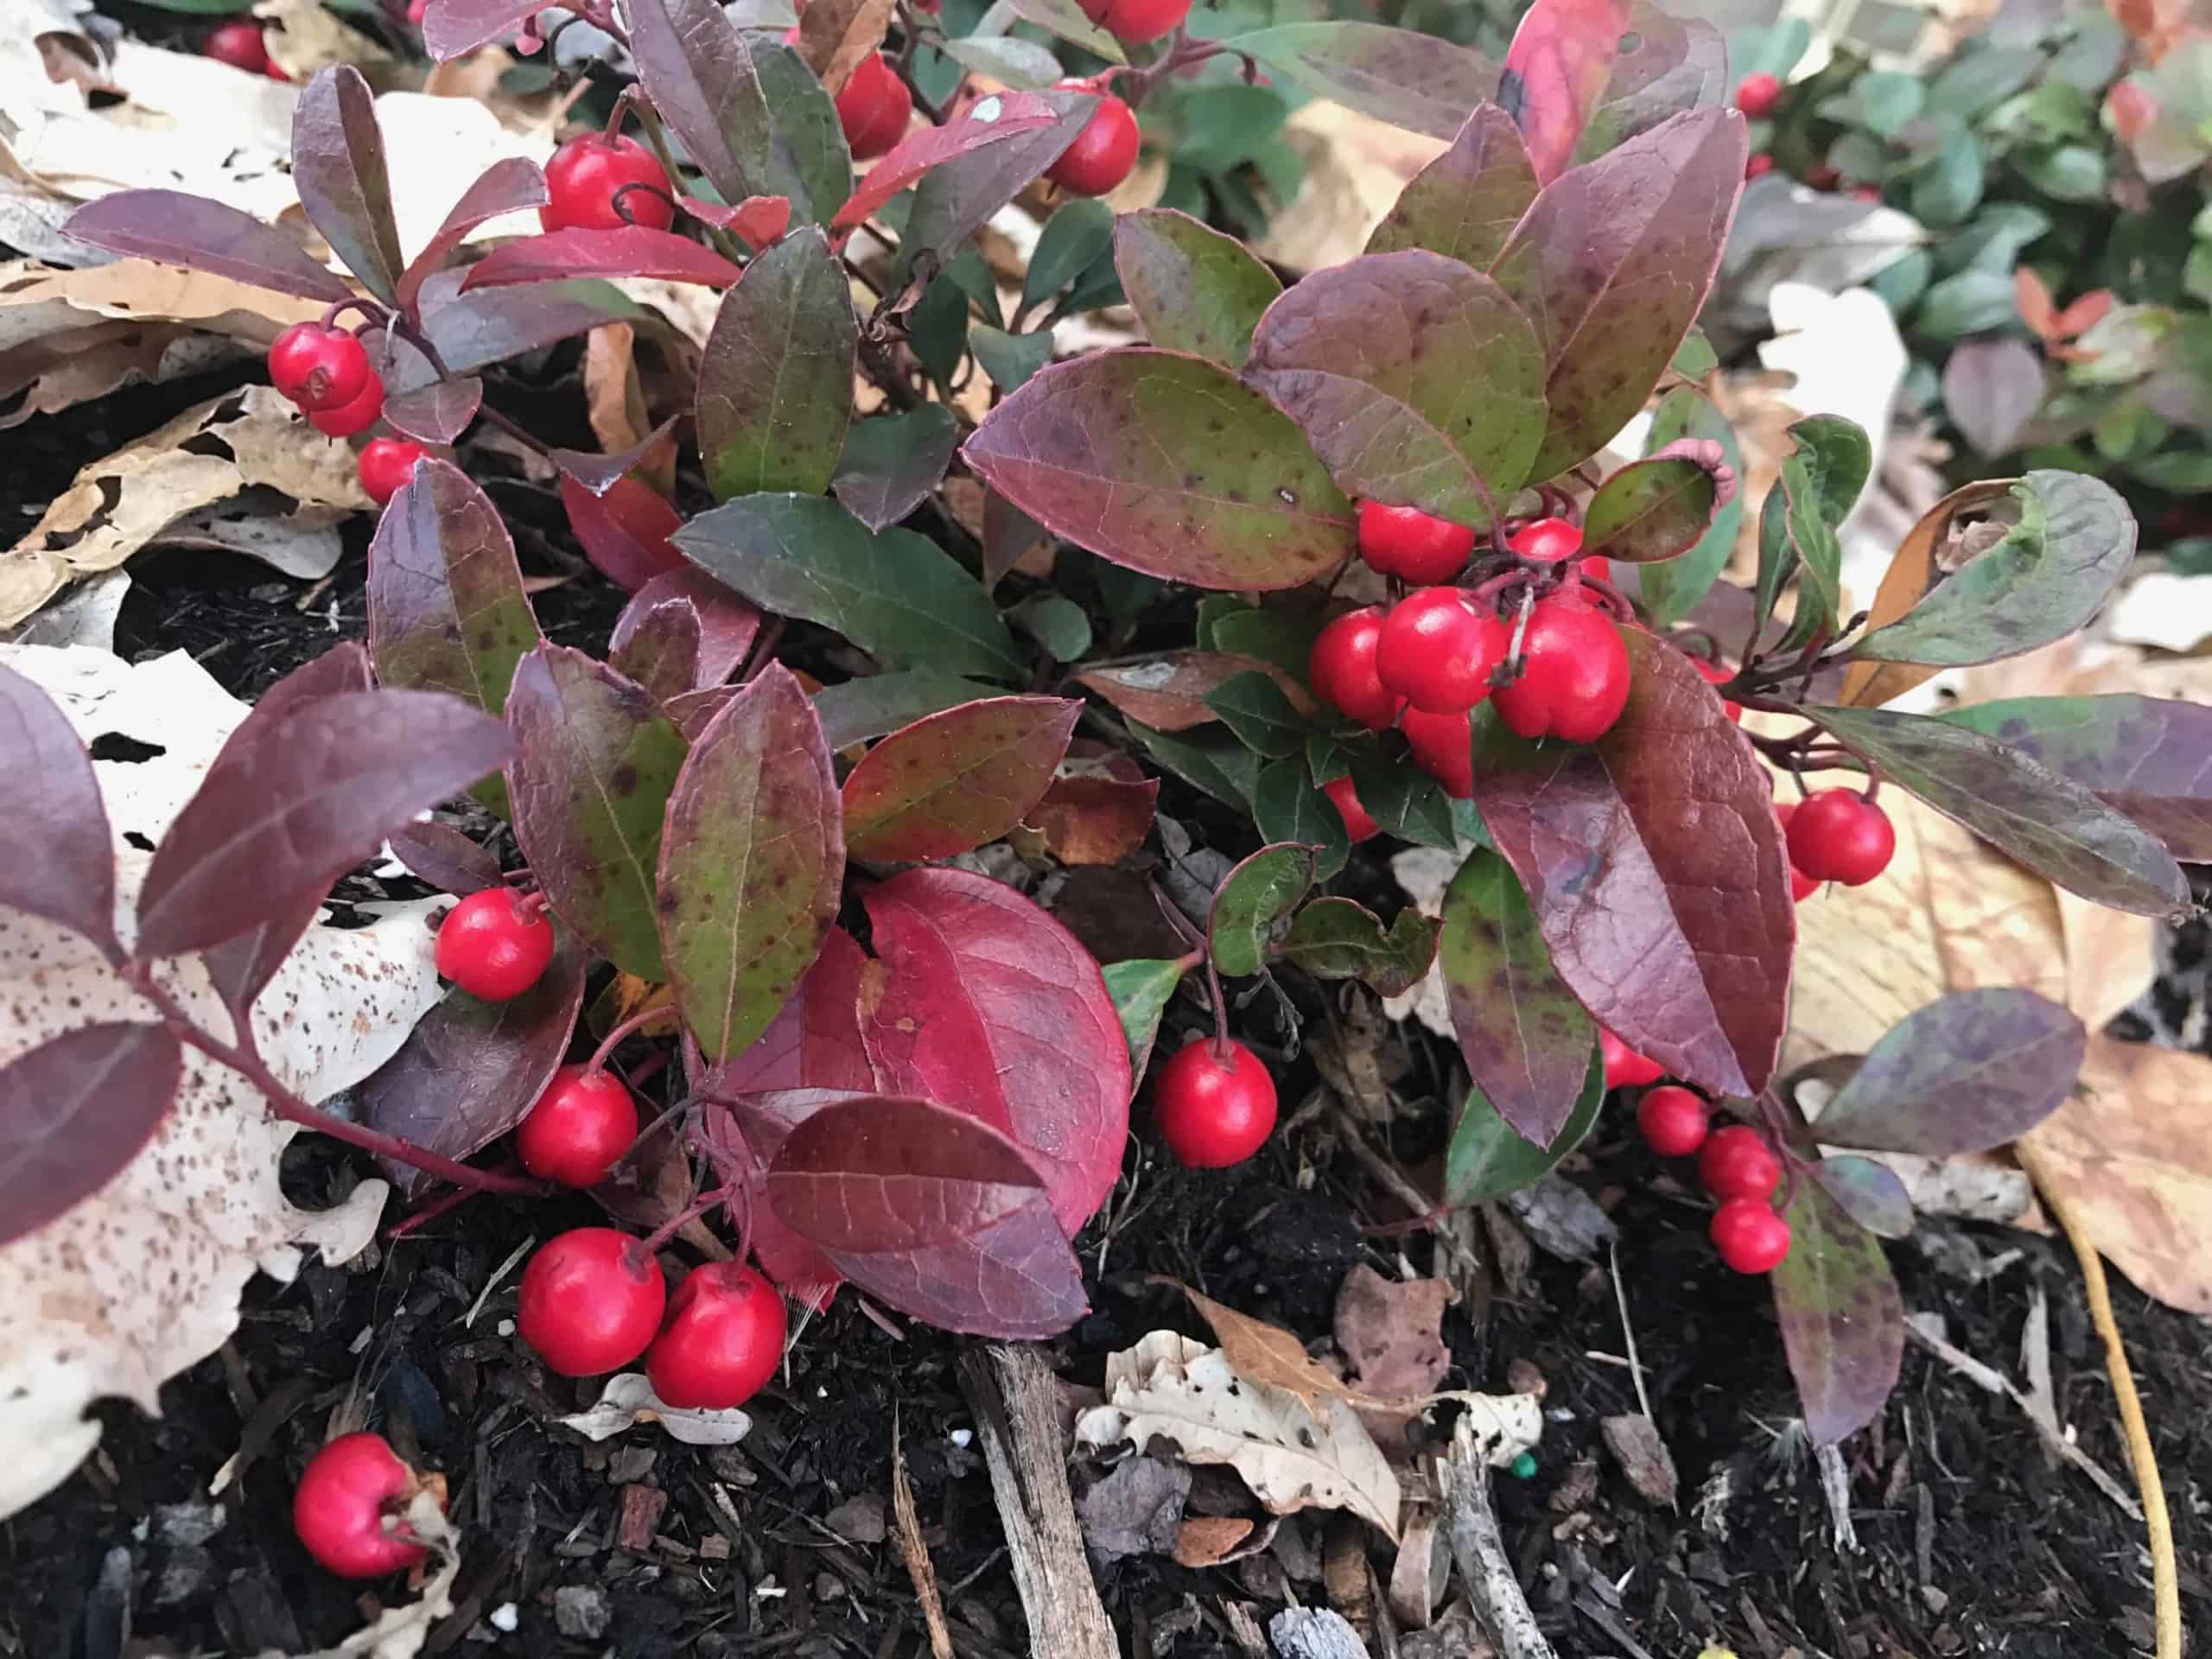 The gardens around 'Large Bowl' near the science quad are bright with fall berries at Williams College.